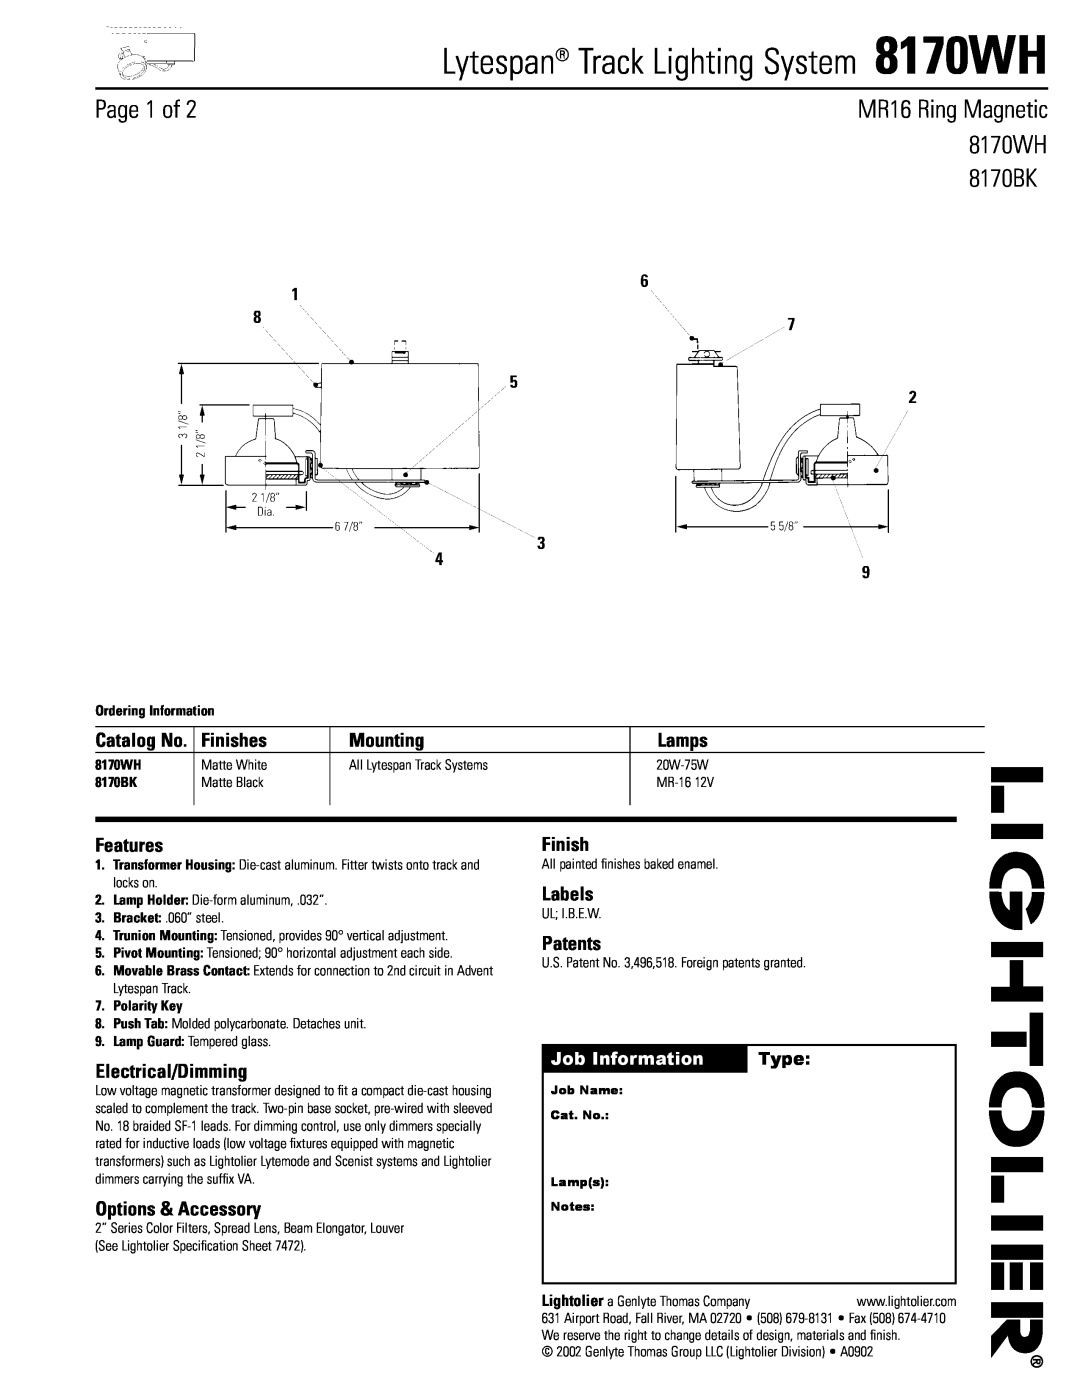 Lightolier 8170WH specifications Page 1 of, Finishes, Mounting, Lamps, Features, Electrical/Dimming, Options & Accessory 